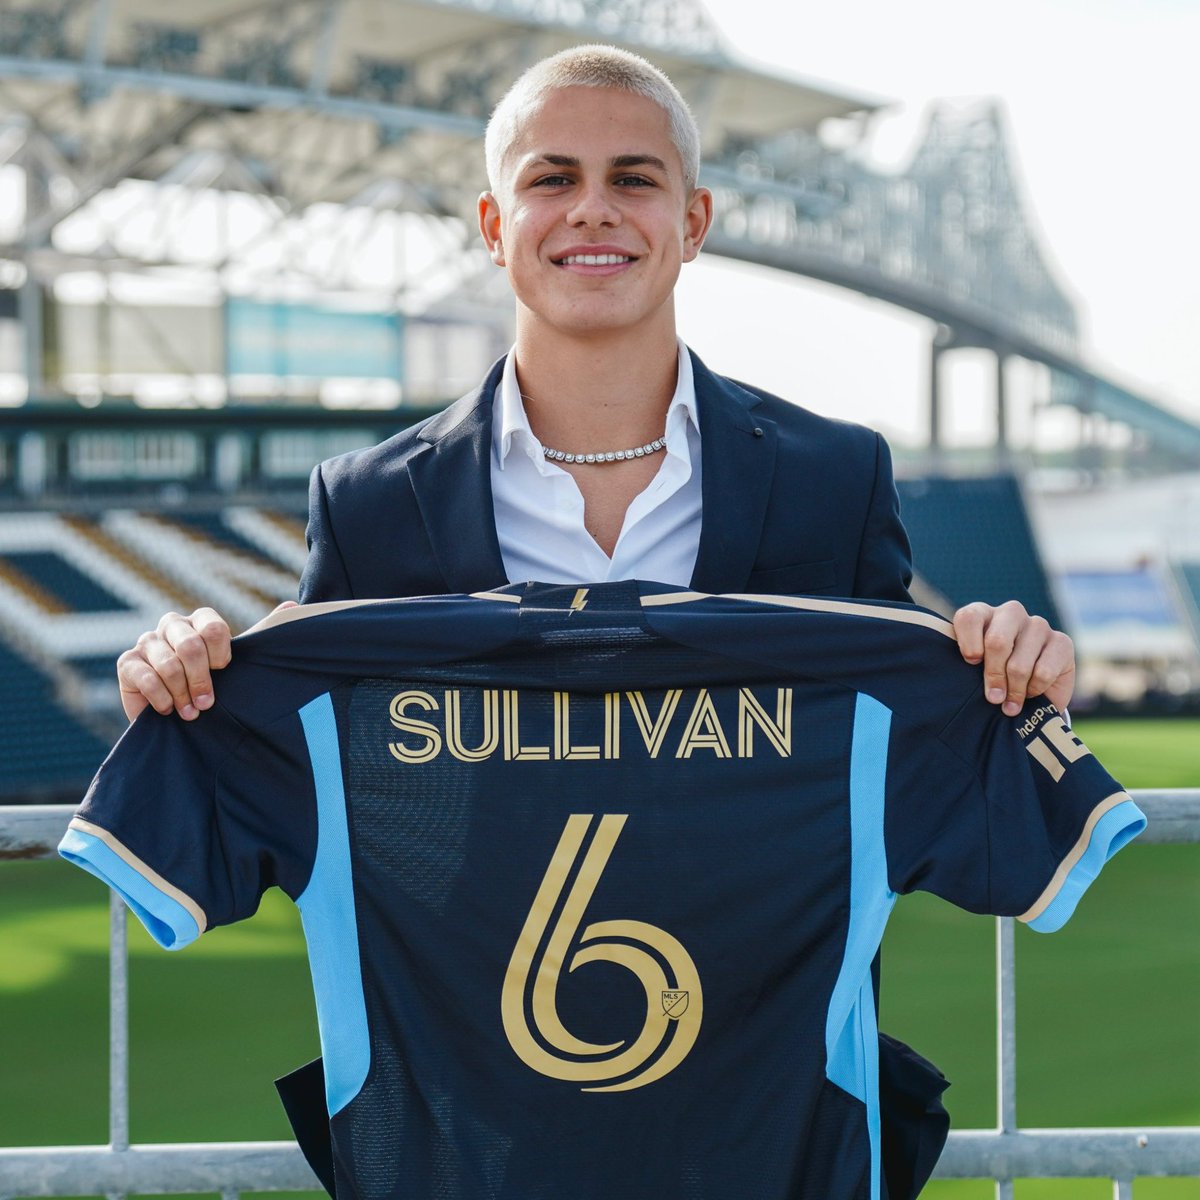 🔵🇺🇸 Cavan Sullivan on joining Man City: “I always watch Man City! They're like every kid's dream team”. “I sat with my family and my agents and we decided that it was the best plan to join City”, told ESPN.